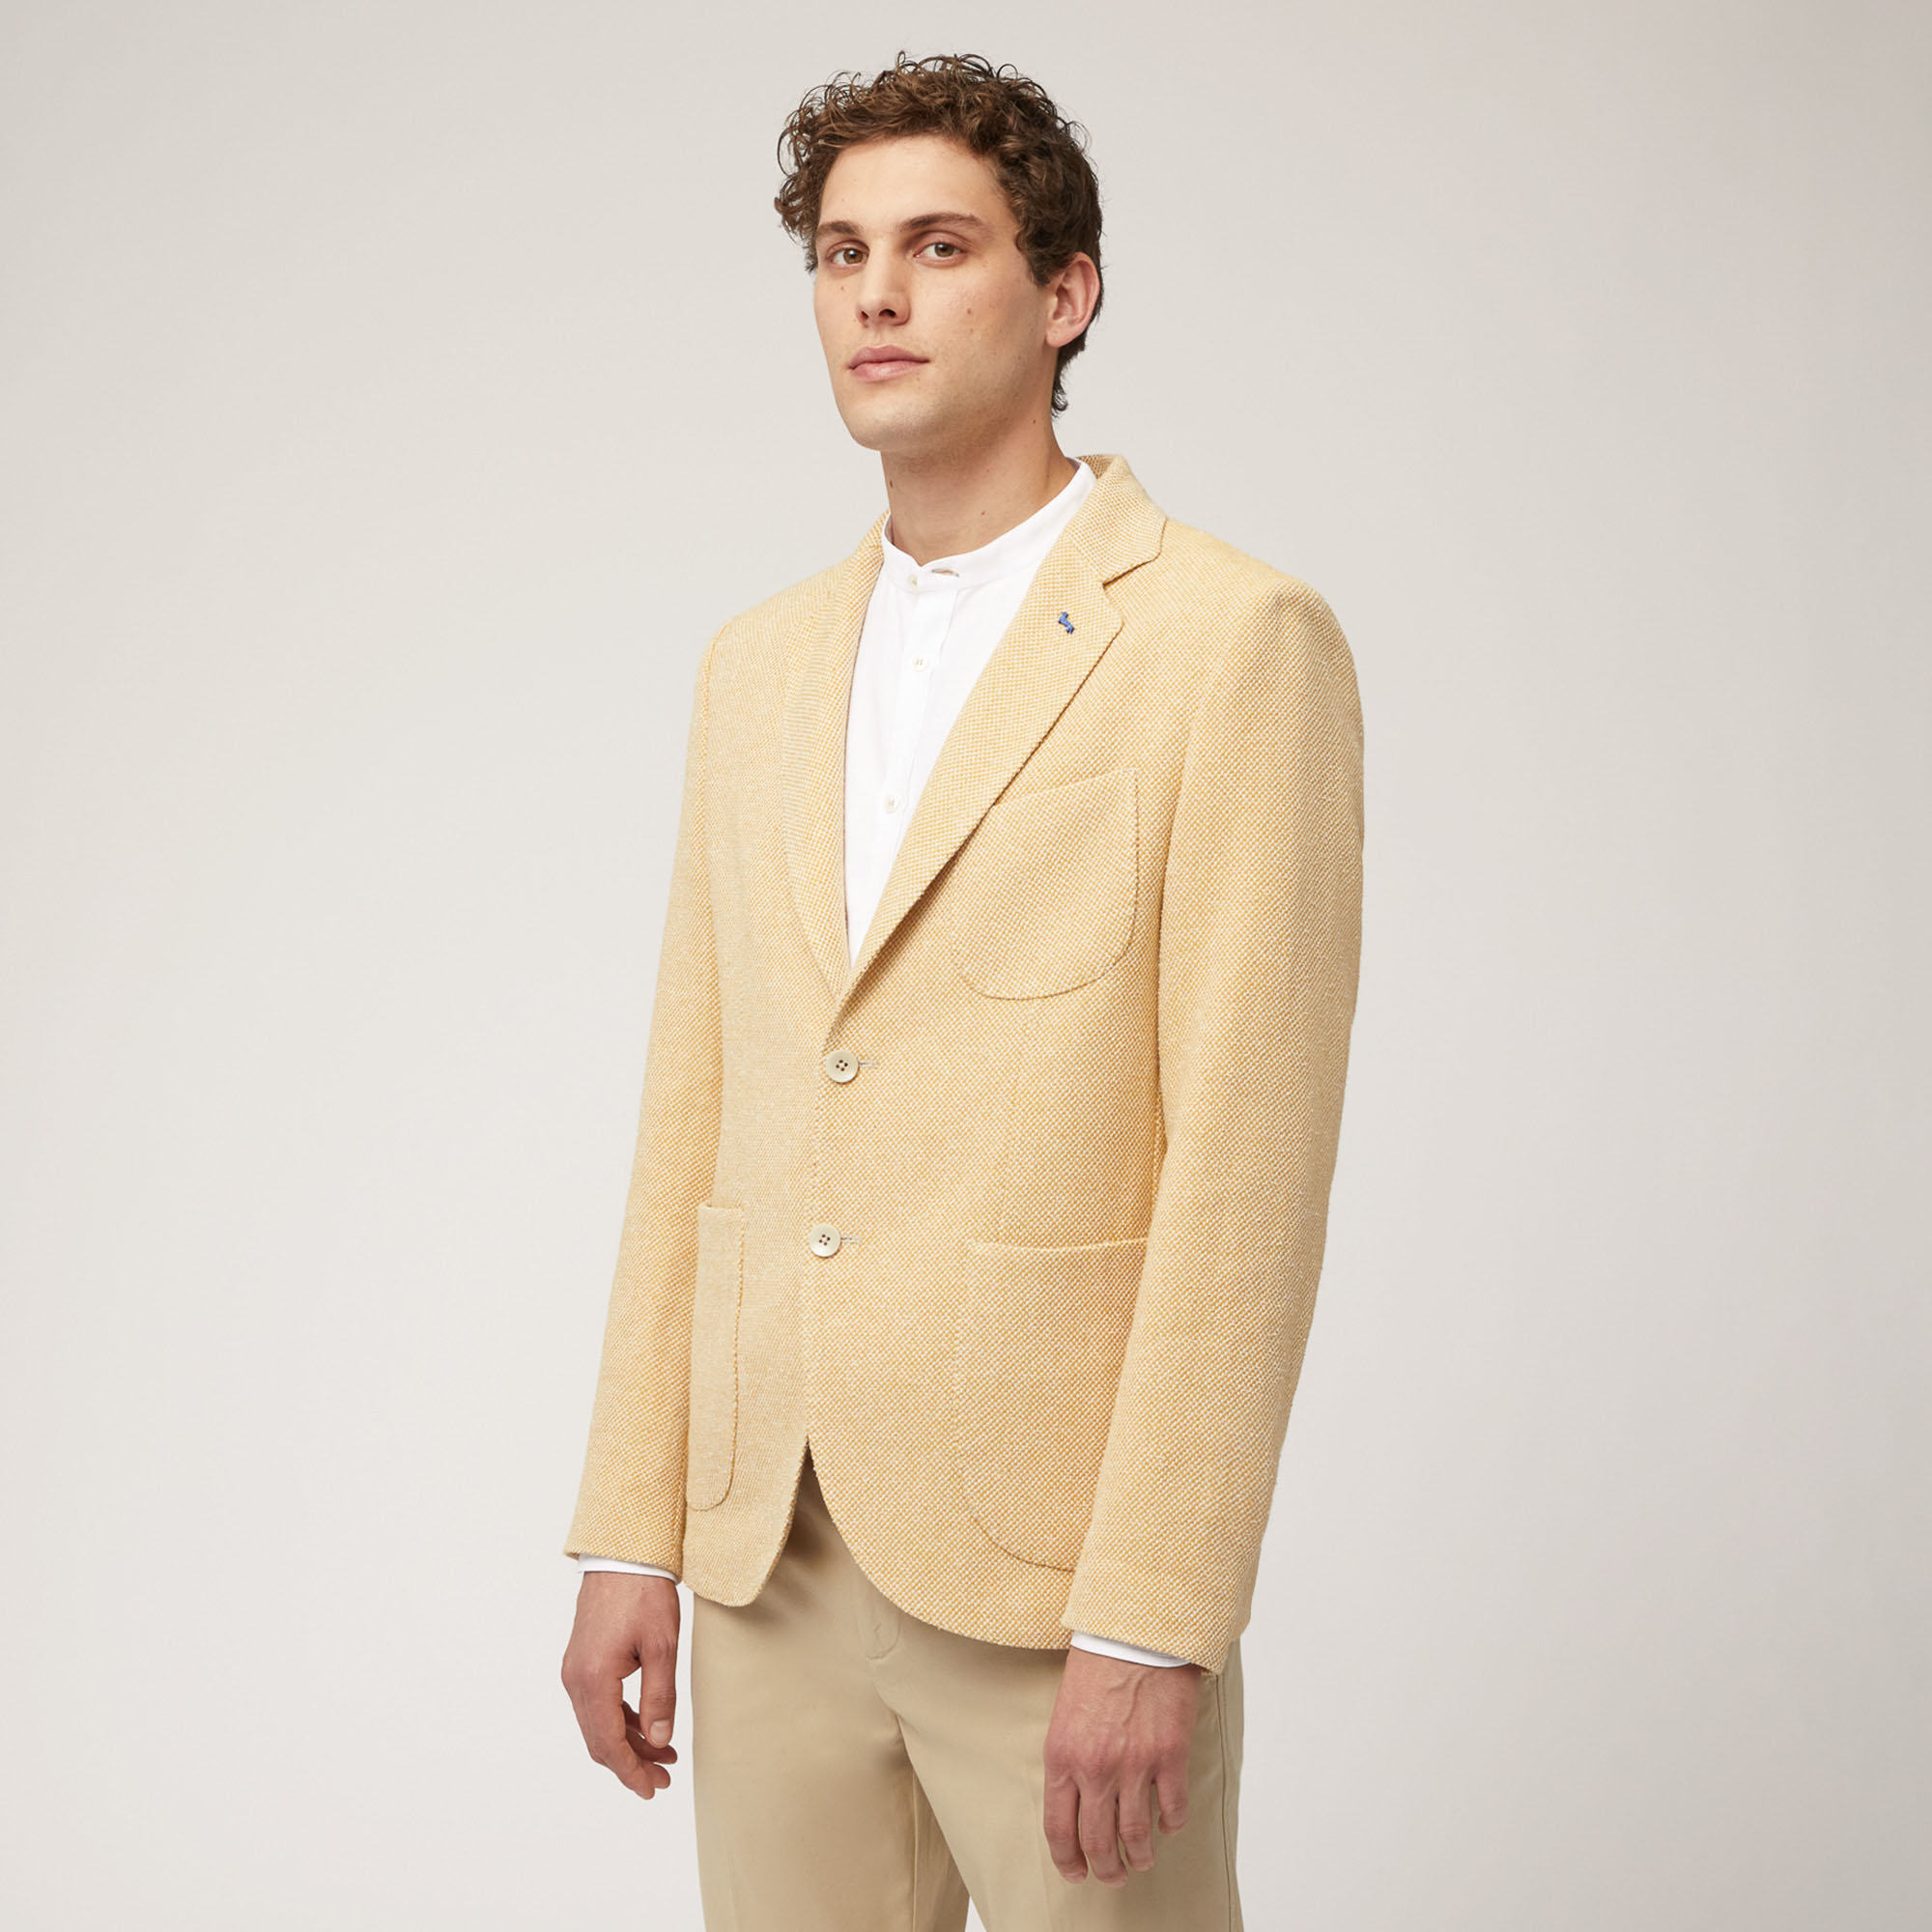 Brown Linen jacket with beige linen pants and shirt | Hockerty